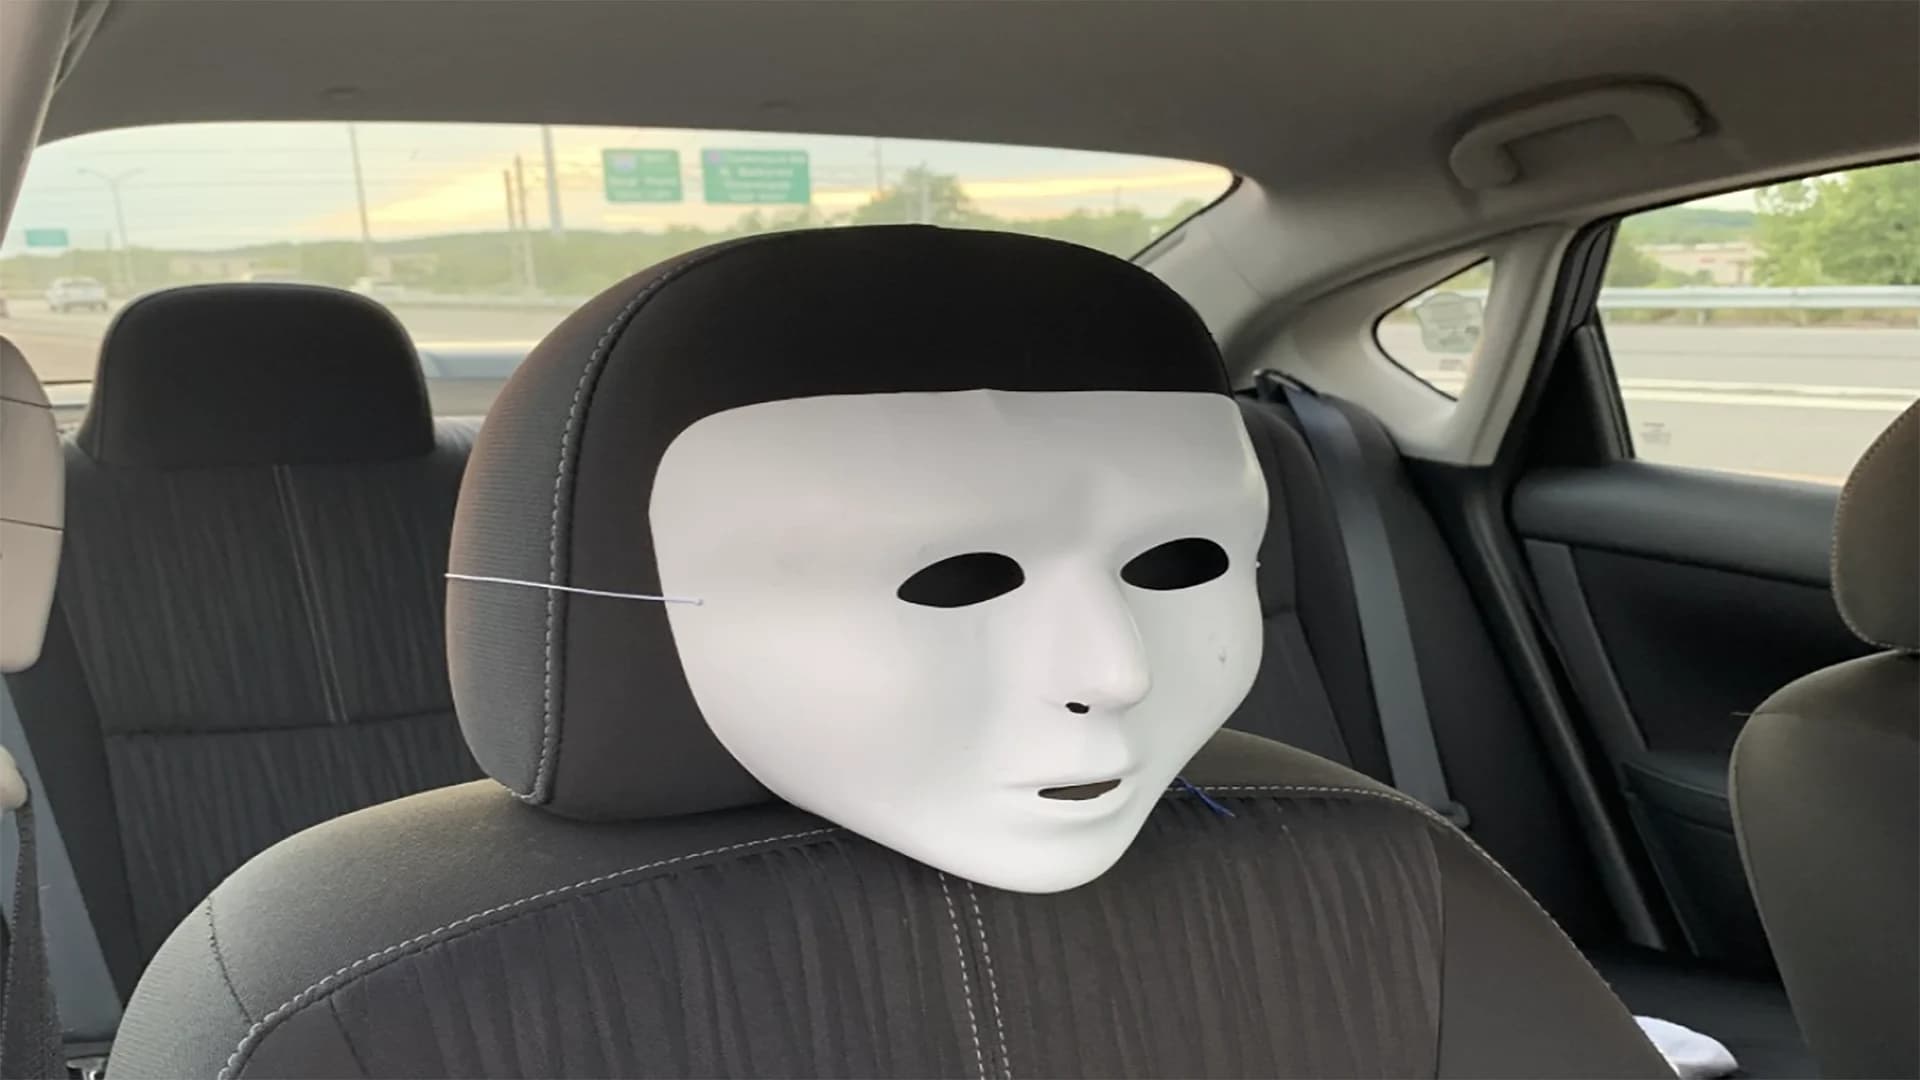 Police: Man disguised passenger seat with mask to use HOV lane